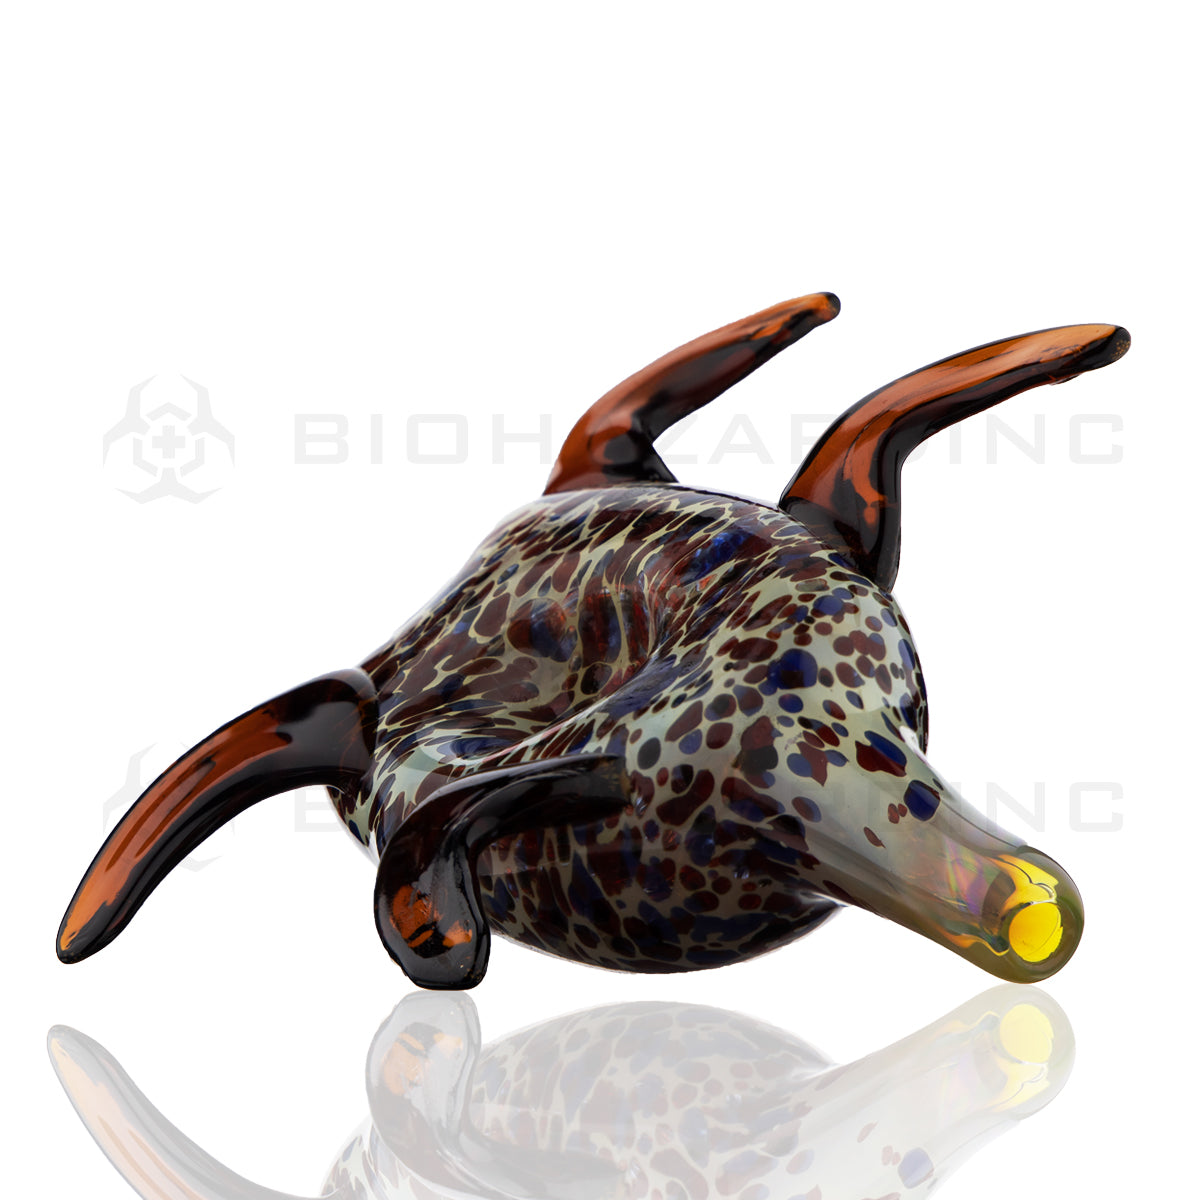 Novelty | Turtle Glass Hand Pipe | 5" - Glass - Brown Novelty Hand Pipe Biohazard Inc   